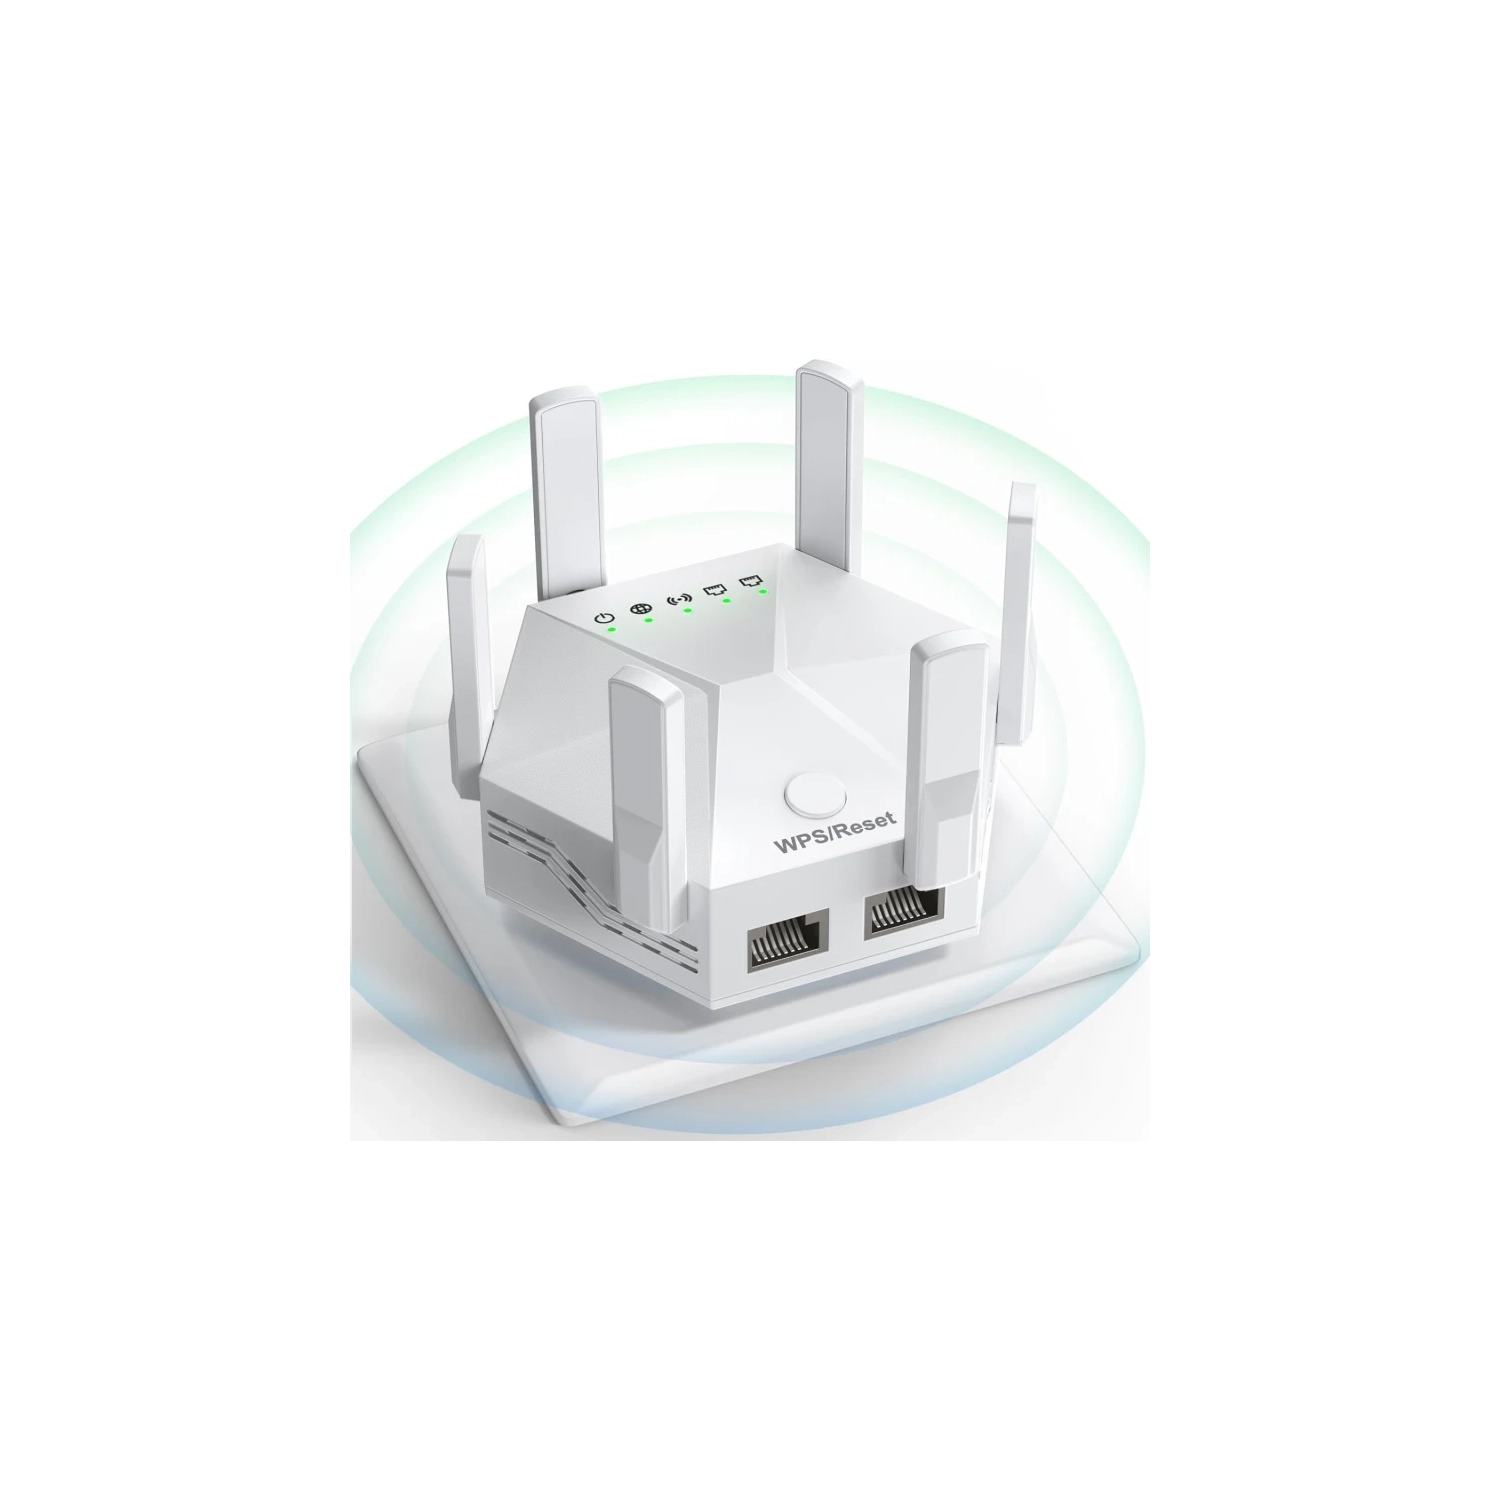 2024 WiFi Extender Signal Booster - Powerful 6 Antennas, Up to 10000 sq.ft Coverage, 1200Mbps Dual Band, Long Range Wireless Internet Repeater for Seamless Connectivity"